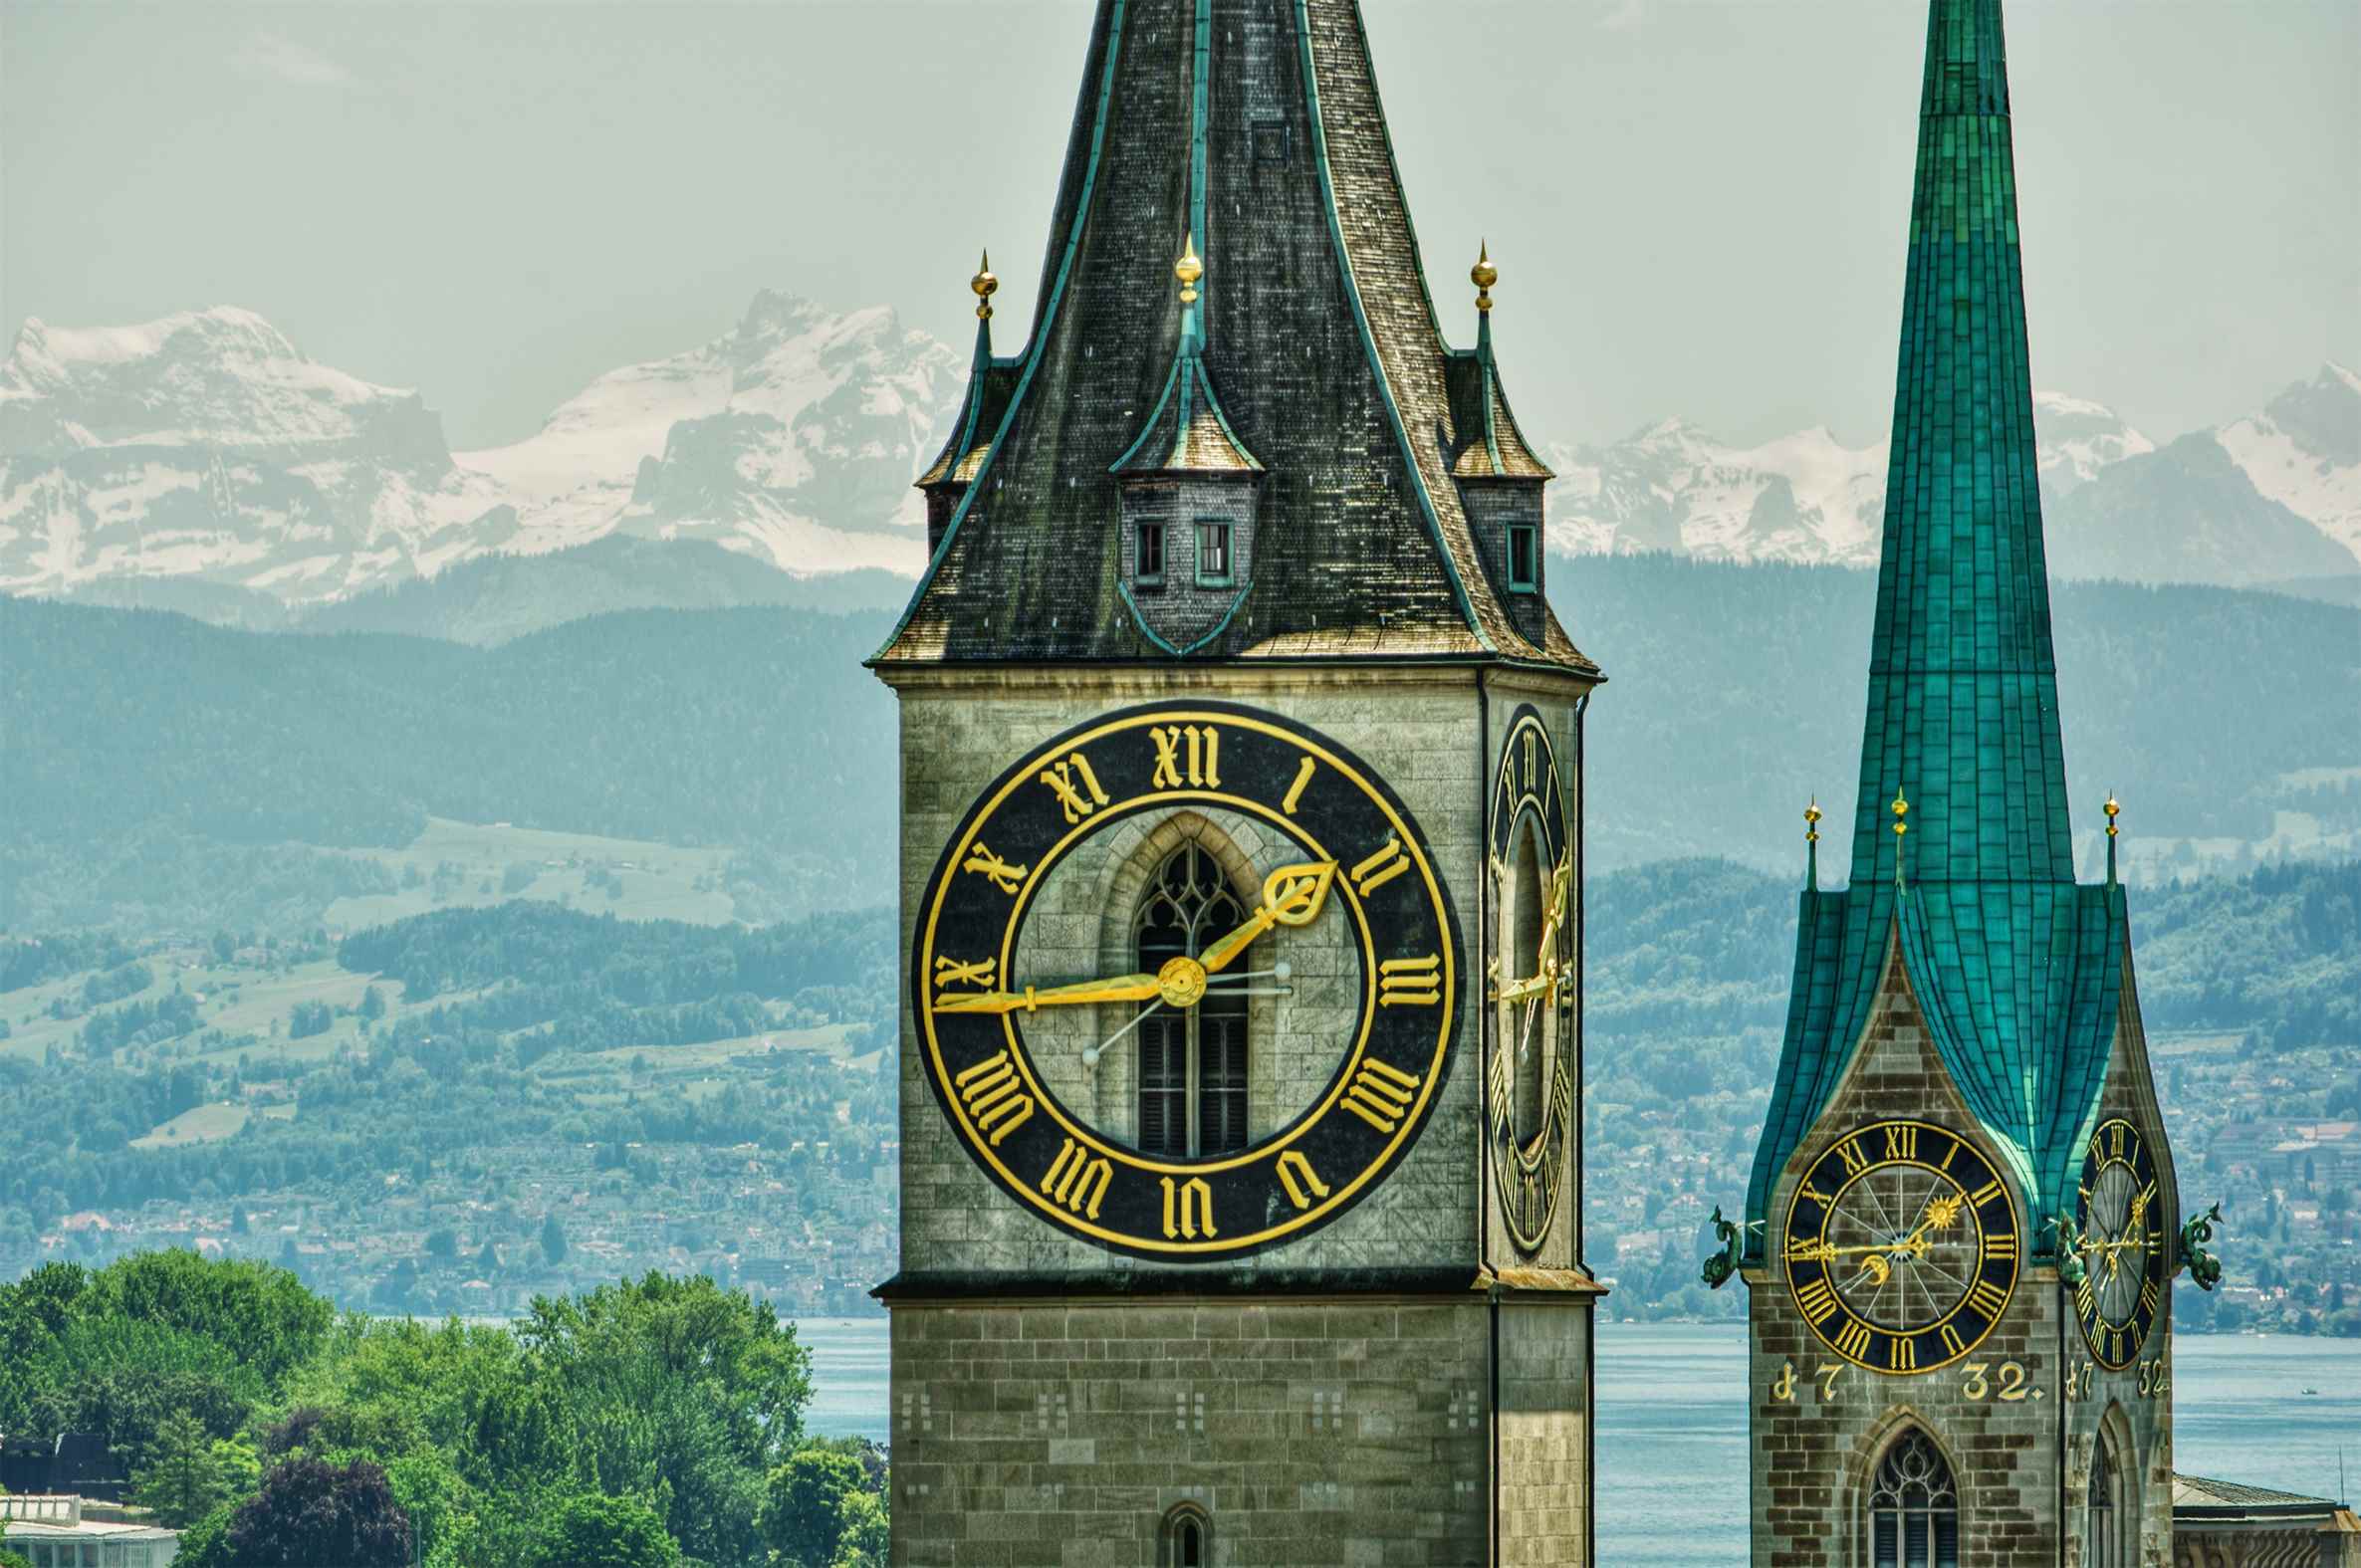 A visit to Beyer’s Clock and Watch Museum in Zurich